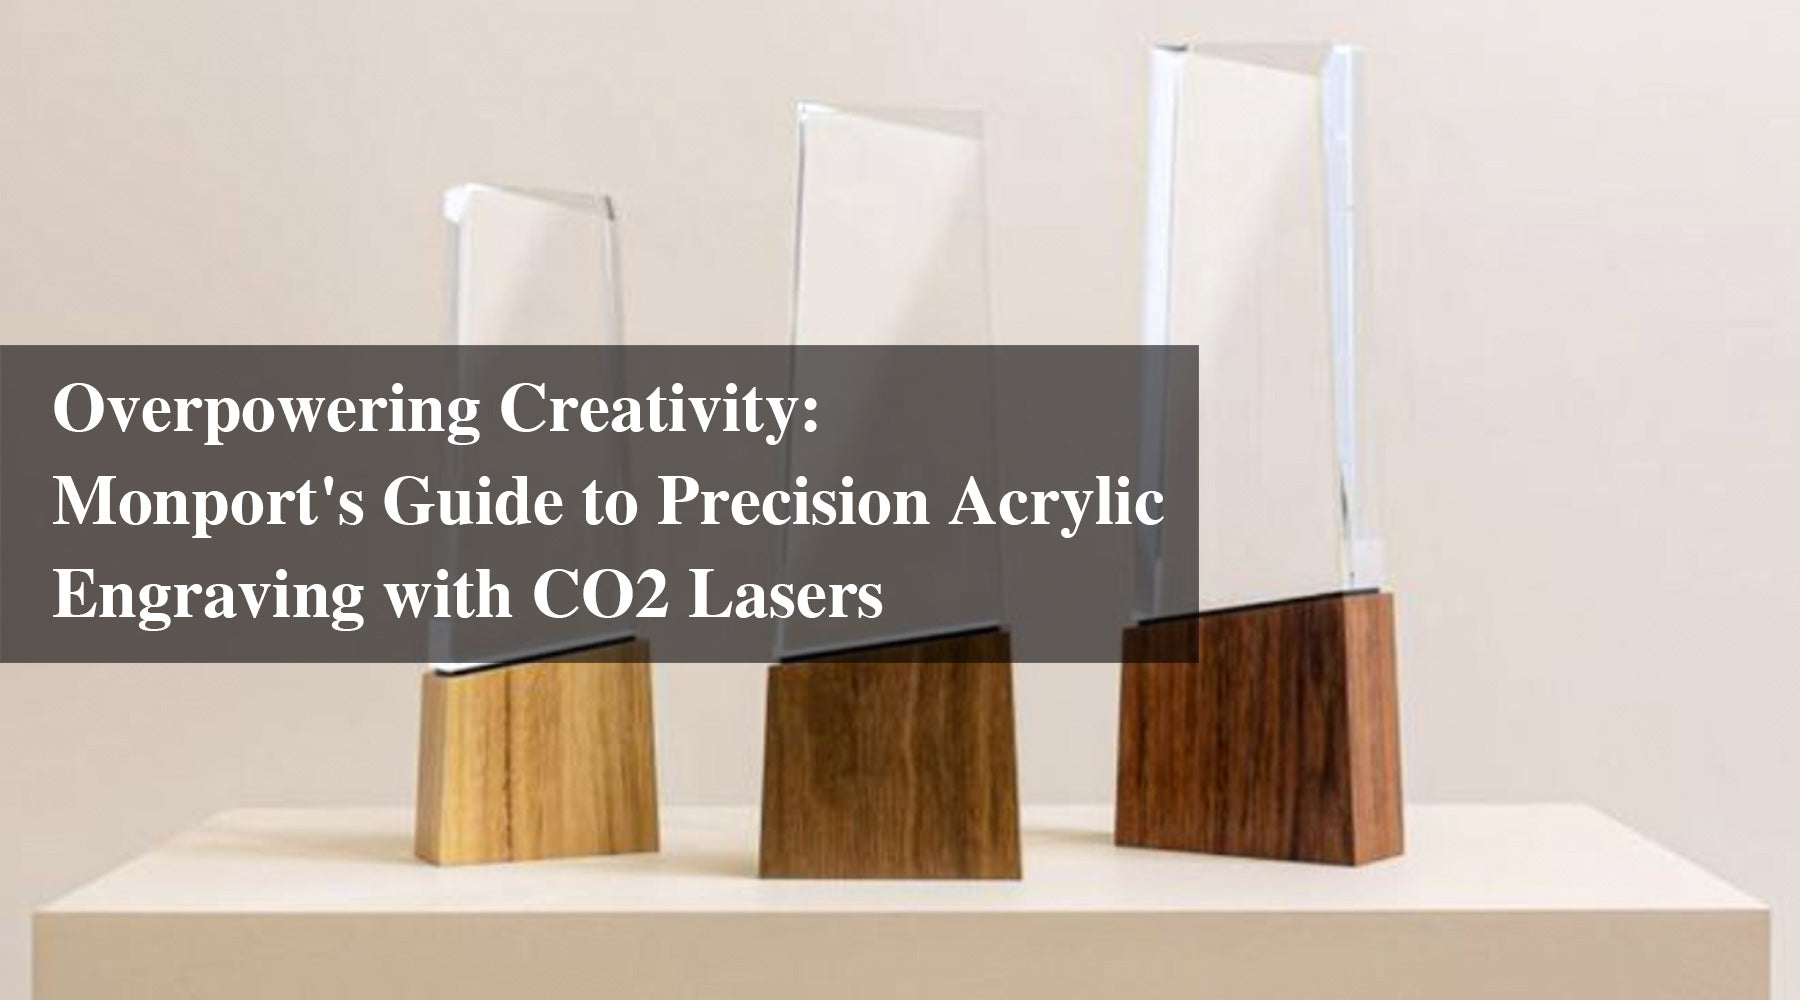 Overpowering Creativity: Monport's Guide to Precision Acrylic Engraving with CO2 Lasers